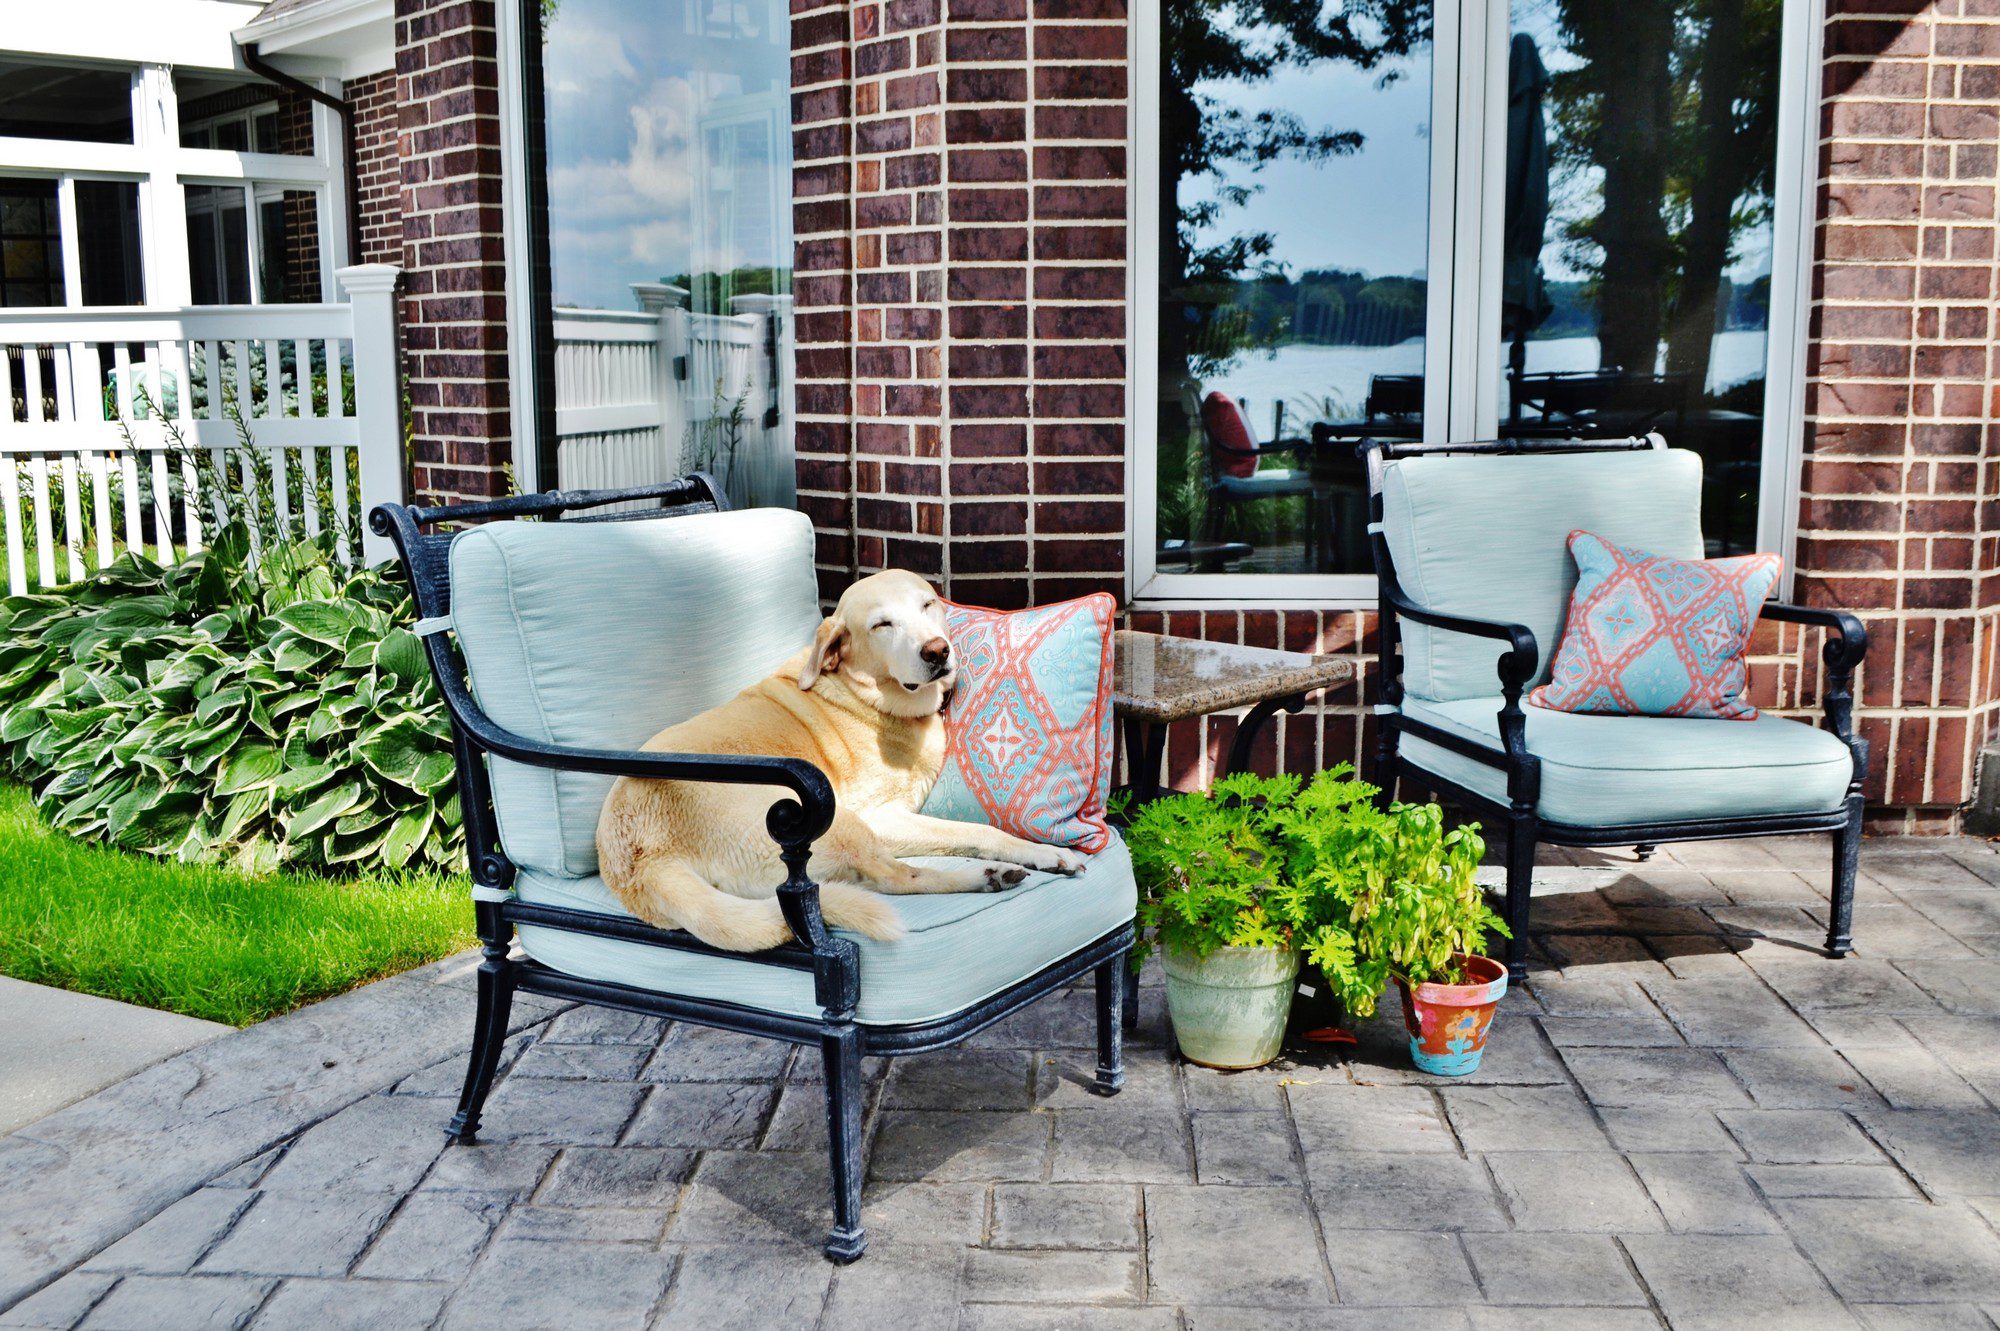 The image shows a relaxing outdoor setting with a dog lying comfortably on a cushioned patio chair. There are two chairs placed on a stone pavement, each adorned with colorful decorative pillows. The architecture suggests a residential setting with a brick house facade and large windows reflecting the trees and waterfront scene in the background. The greenery consists of a host of plants including large leafy hostas and smaller potted plants, contributing to a cosy and serene atmosphere. A white picket-style fence can be glimpsed to the left, subtly accentuating the well-manicured suburban aesthetic.